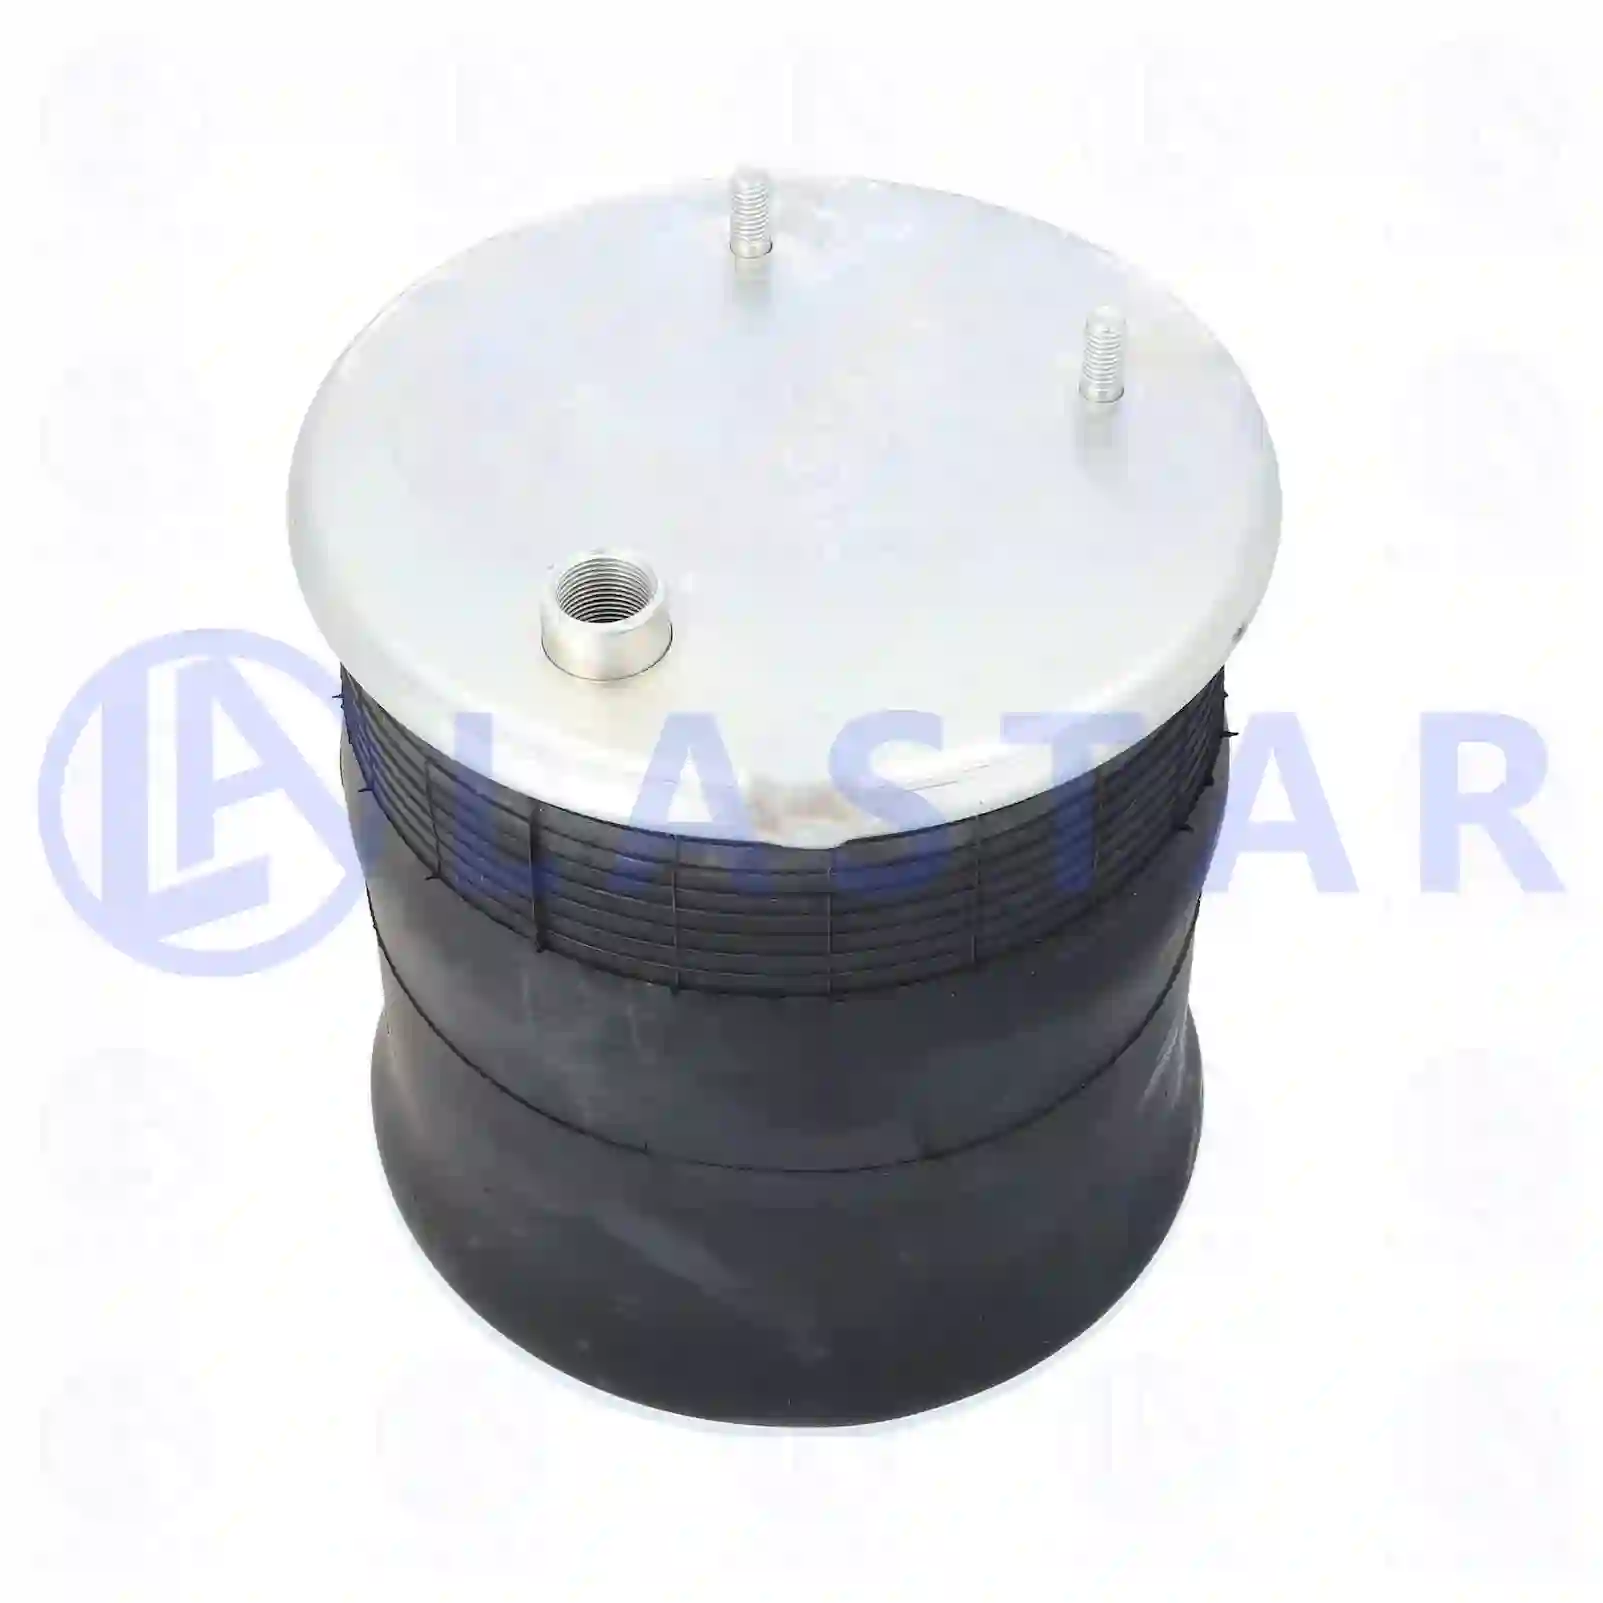 Air spring, with steel piston, 77728516, 1794428 ||  77728516 Lastar Spare Part | Truck Spare Parts, Auotomotive Spare Parts Air spring, with steel piston, 77728516, 1794428 ||  77728516 Lastar Spare Part | Truck Spare Parts, Auotomotive Spare Parts